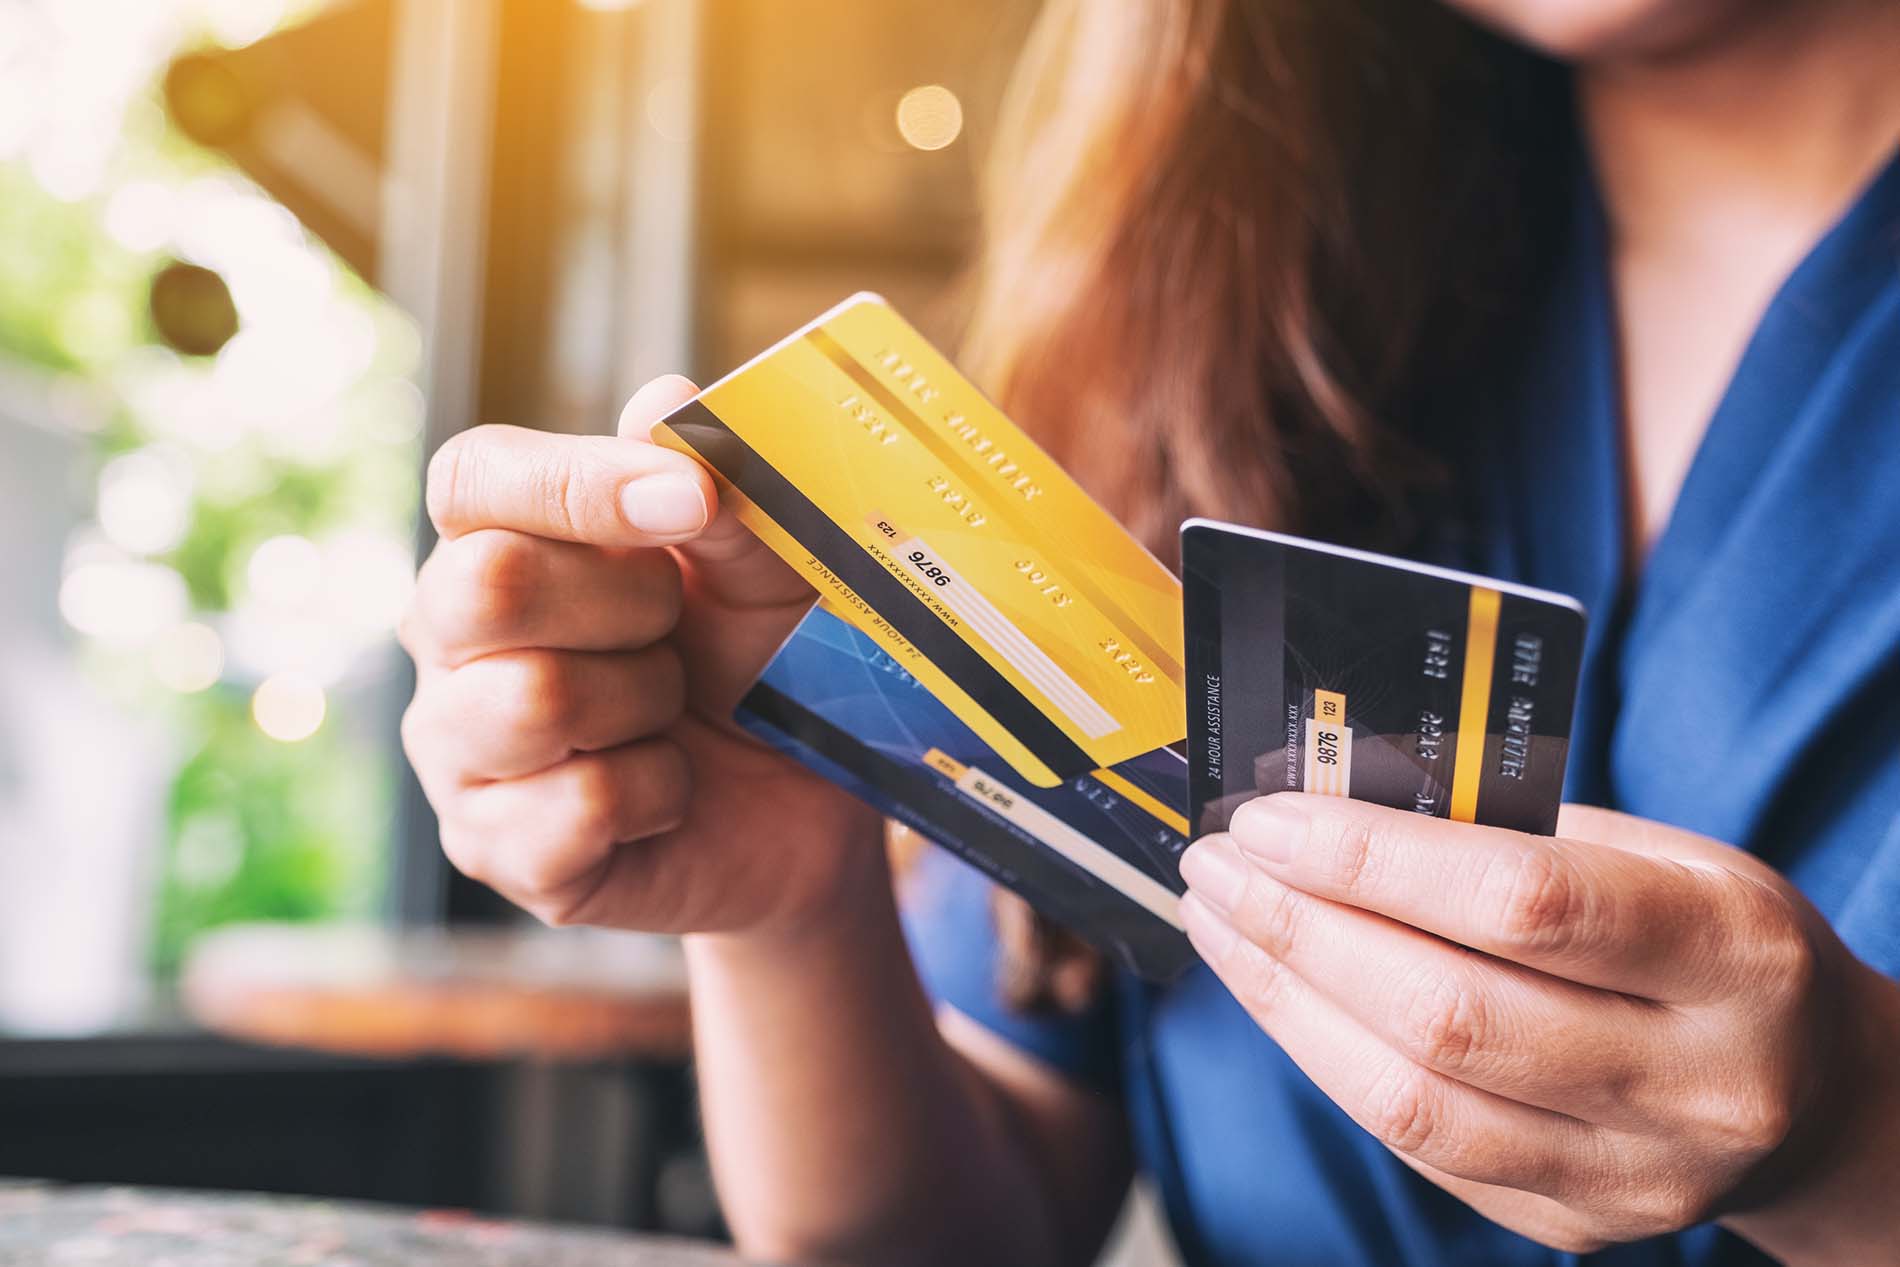 Close-up of a woman holding three credit cards fanned out, deciding which card is the best.